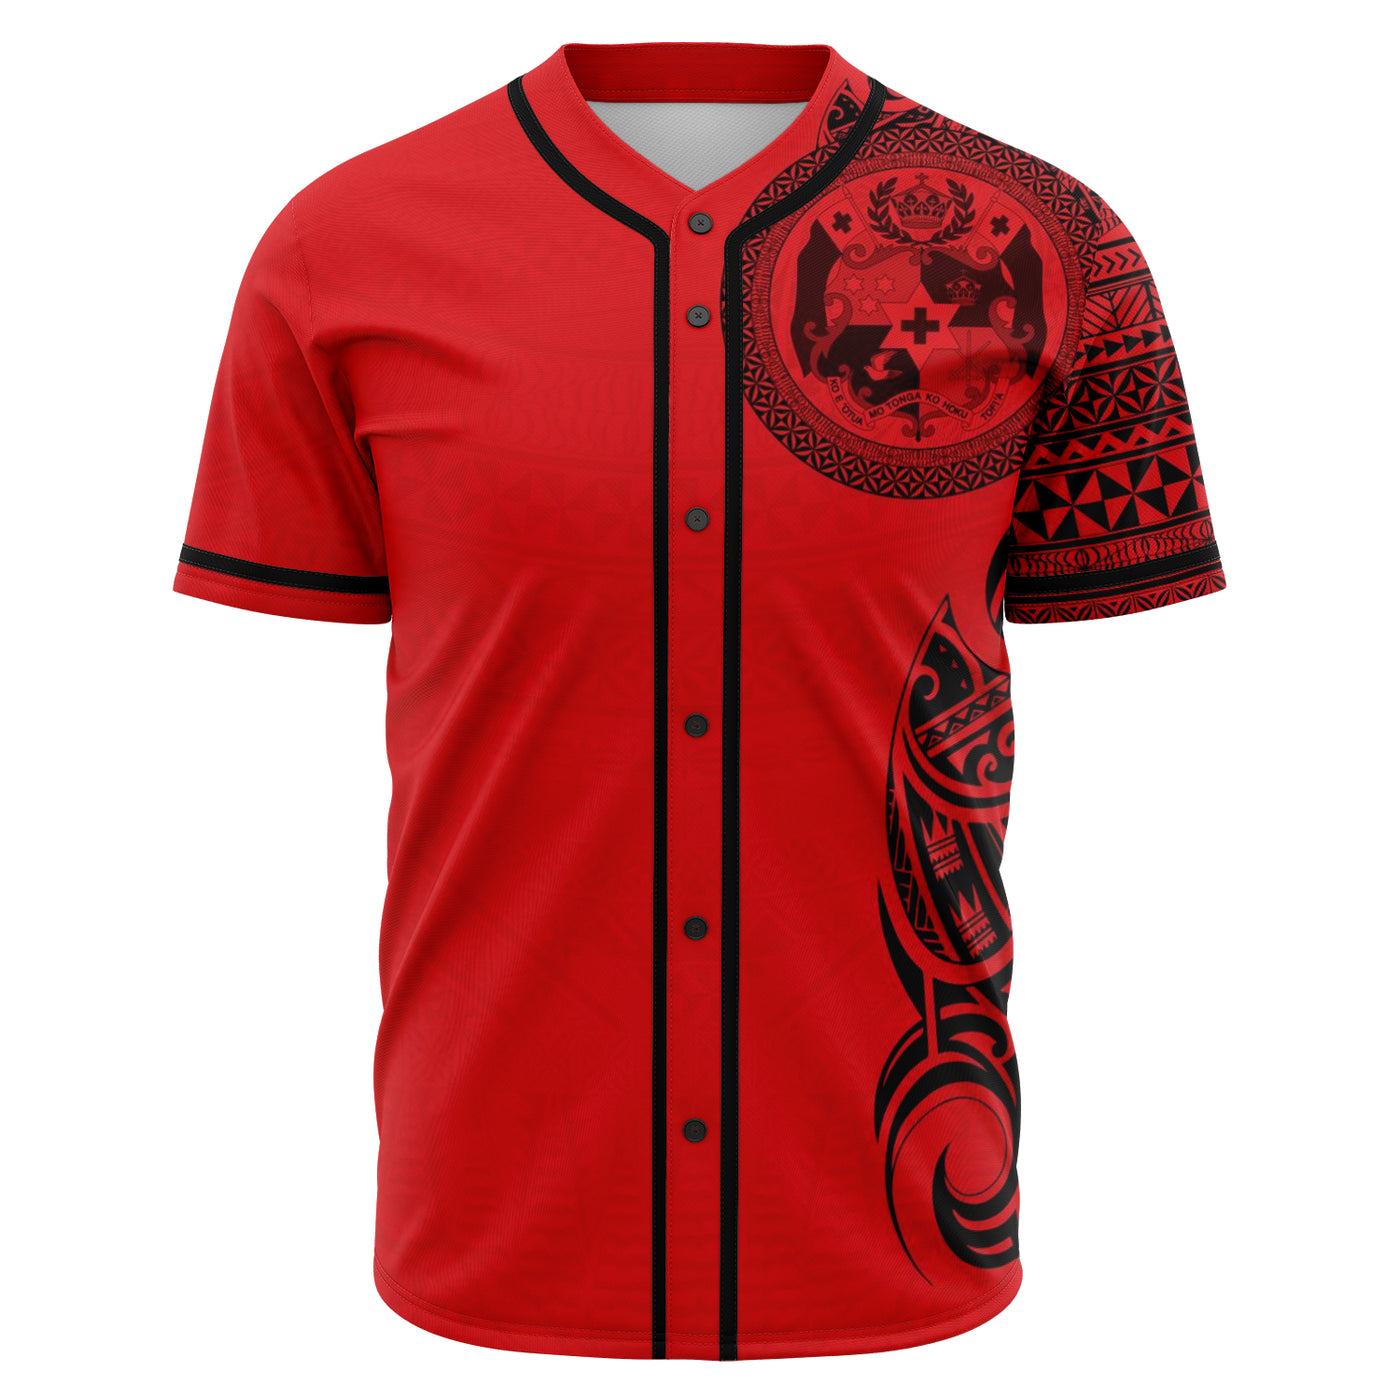 baseball jersey red and black